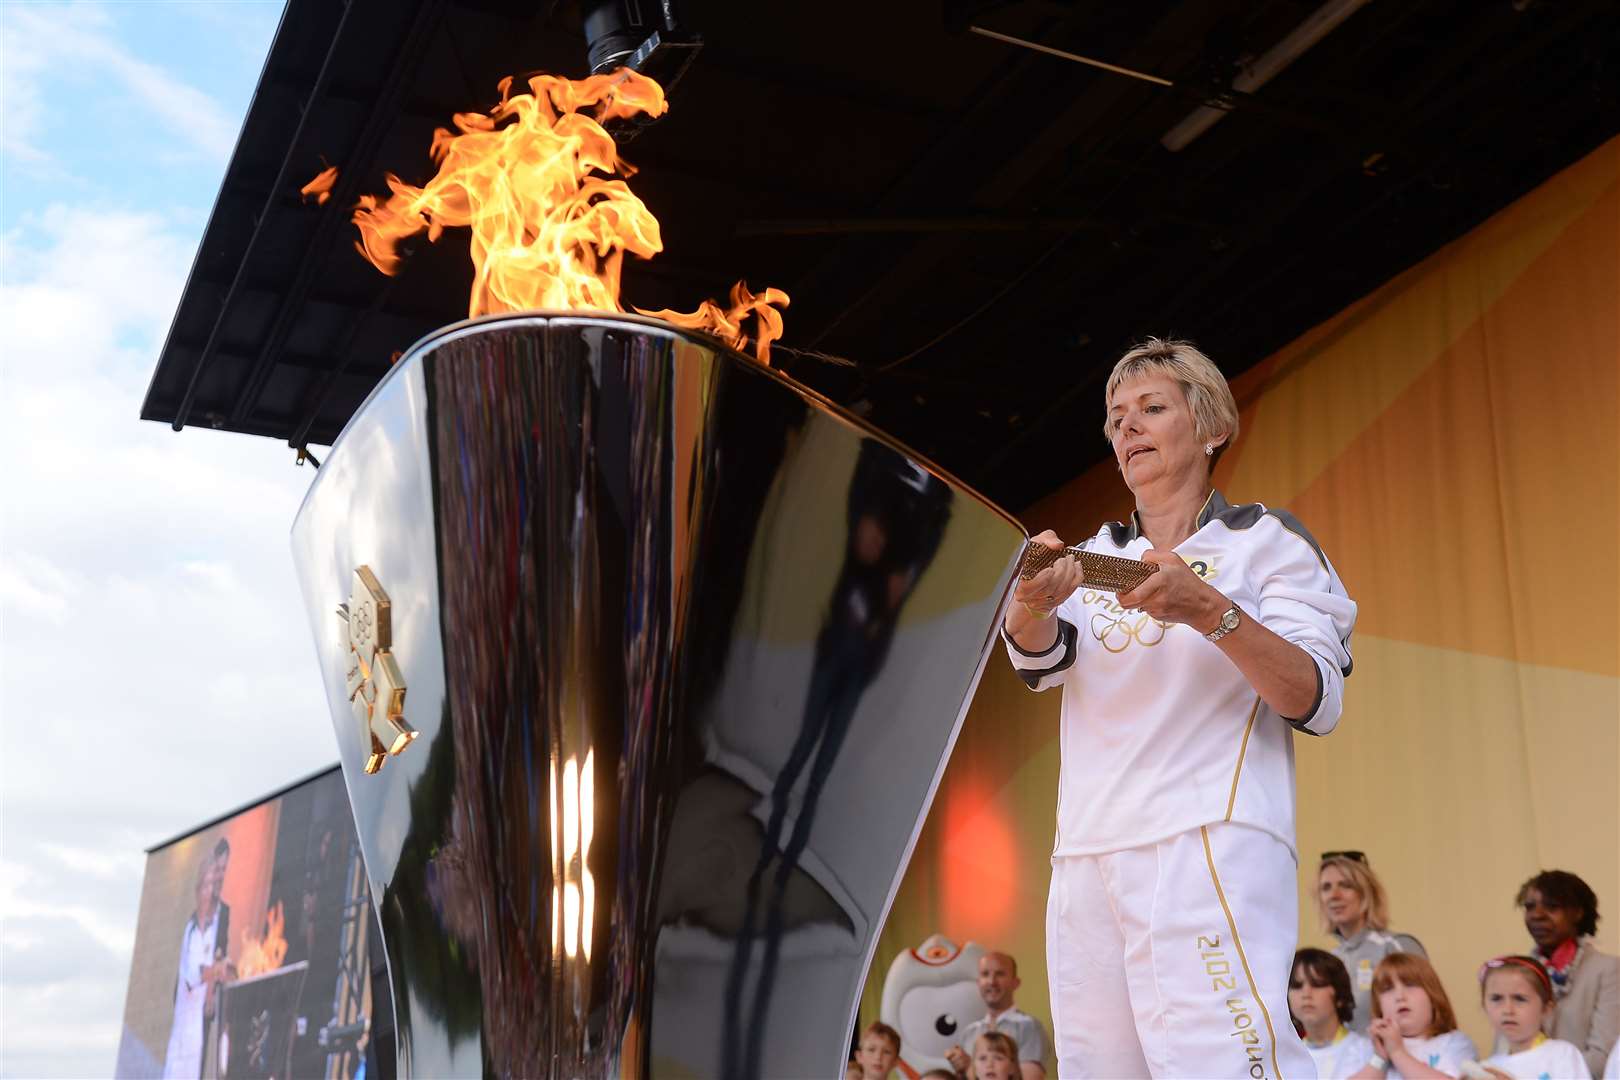 Julia Chilcott lights the cauldron at the end of day 62. Pic: Locog